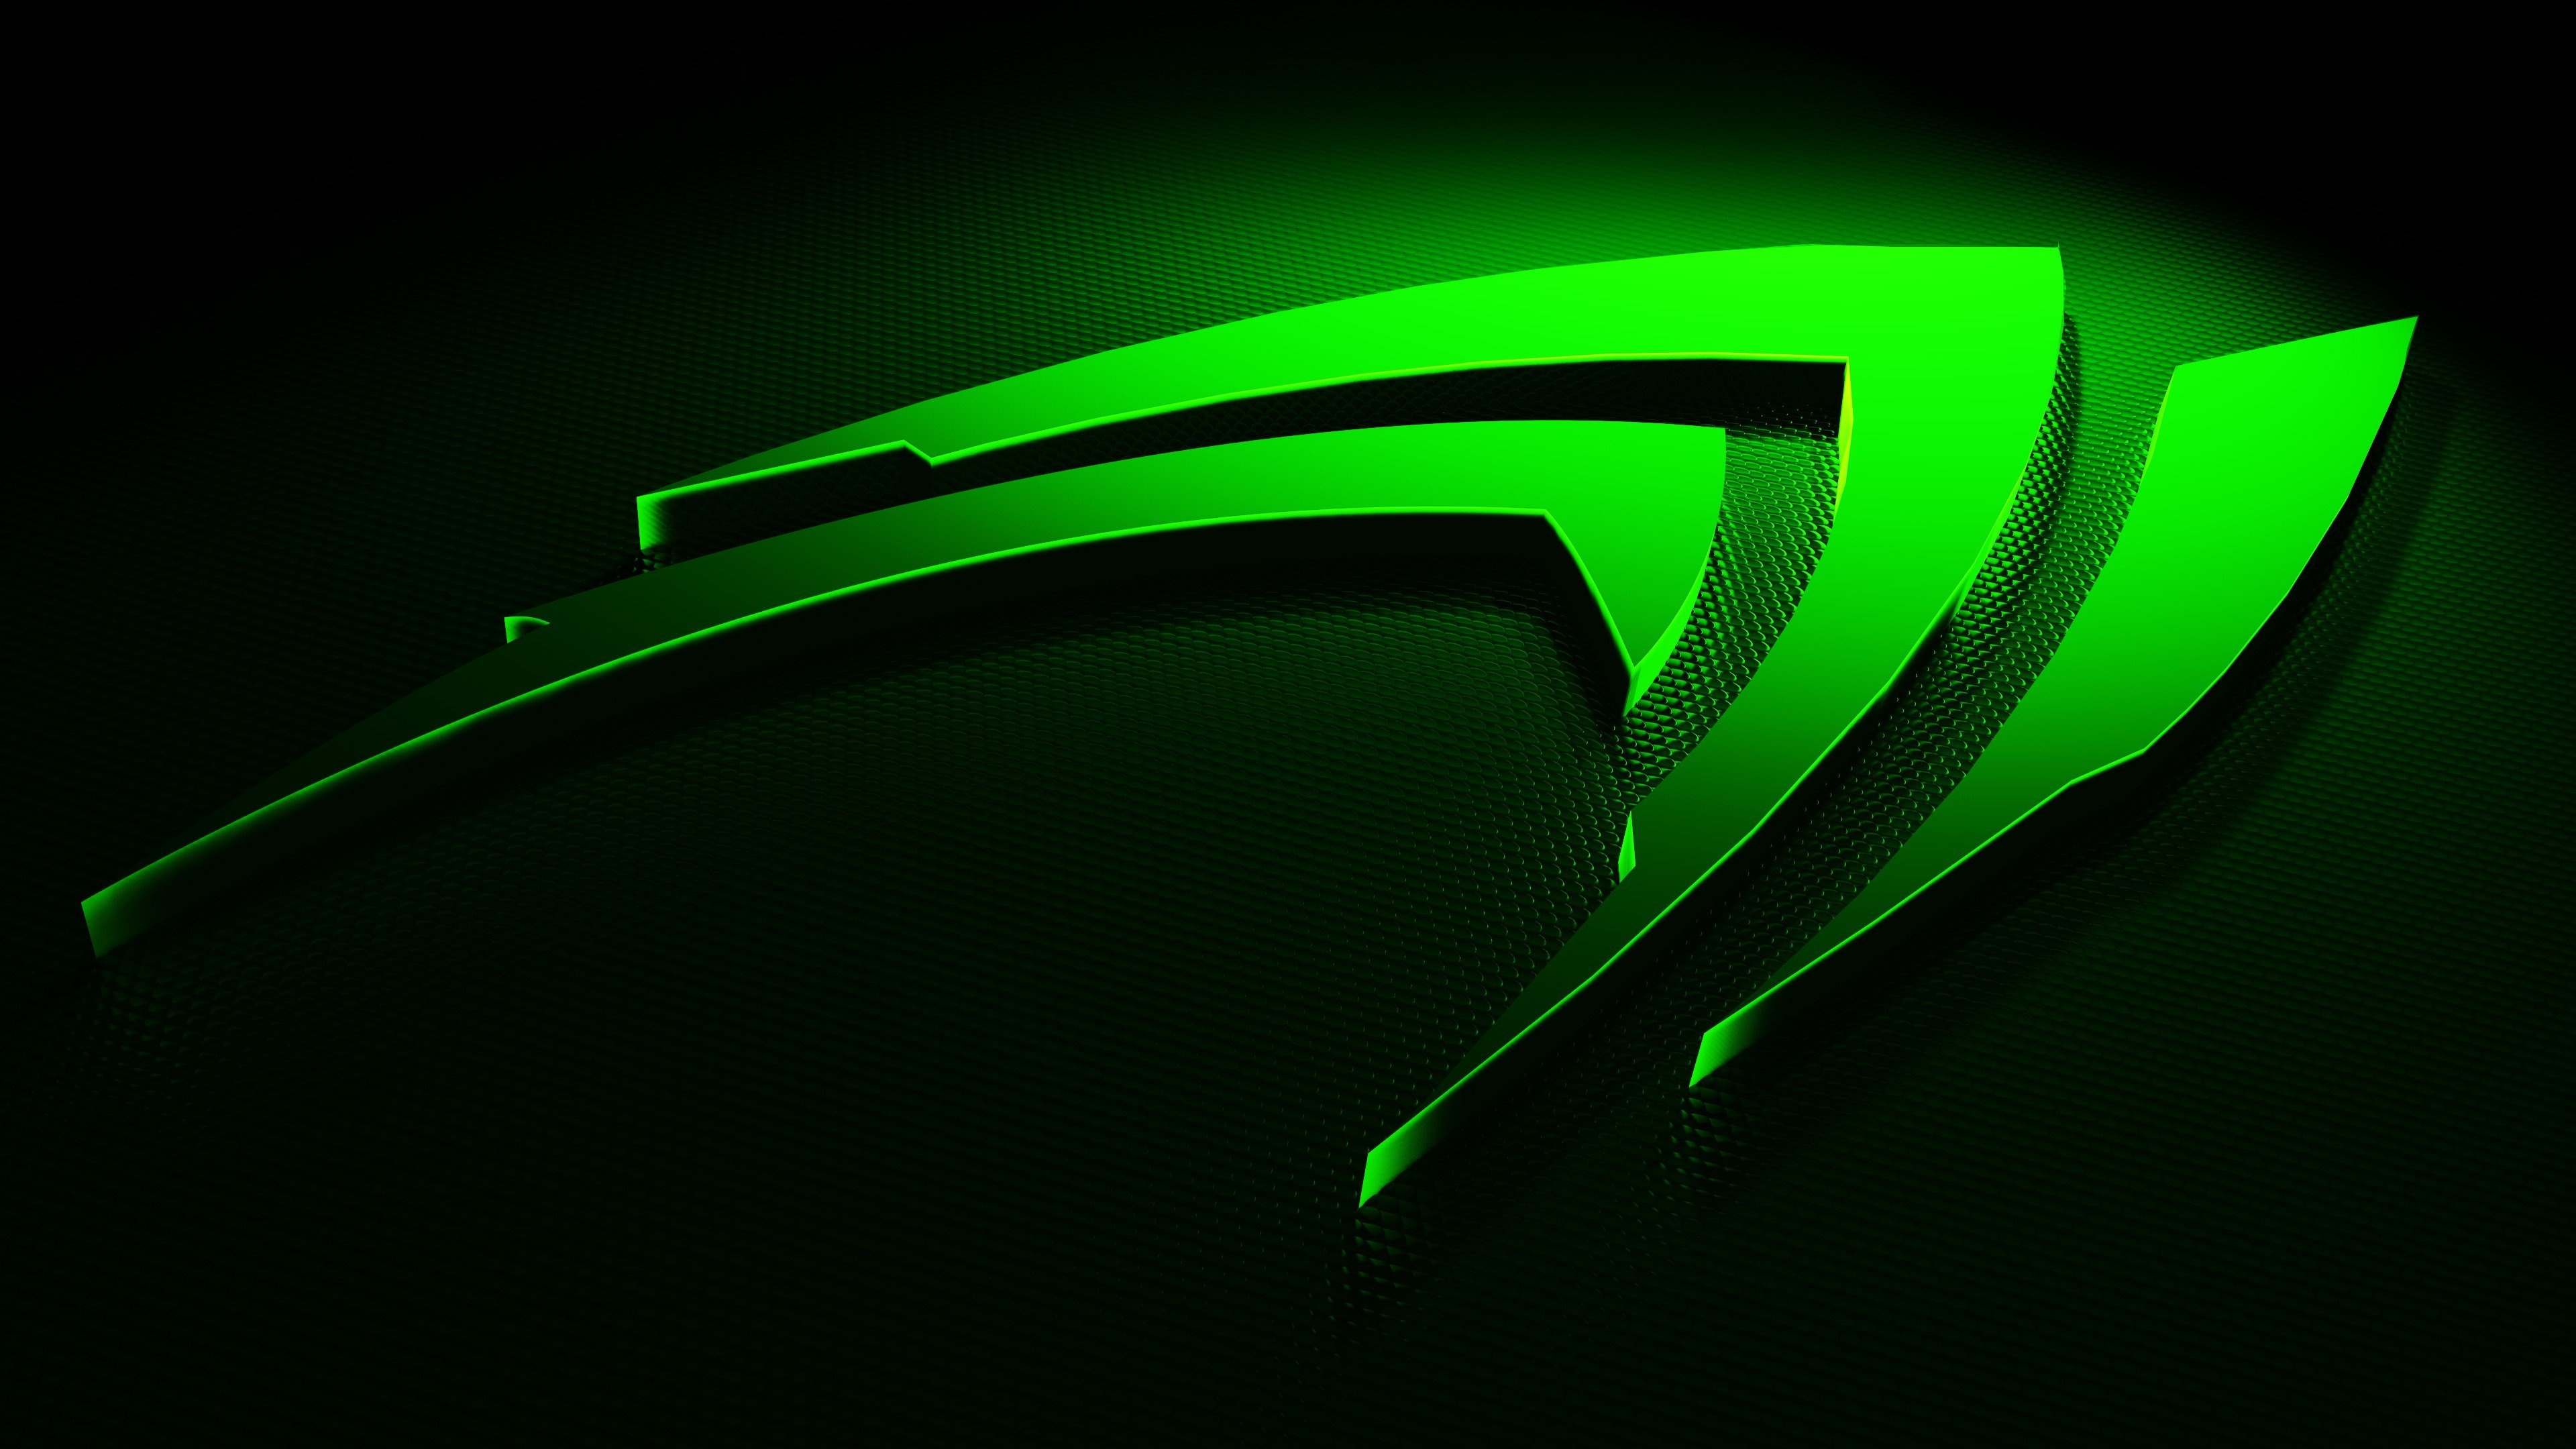 Nvidia: First logo in 1993, Basic visual metaphor - an eye that sees everything. 3840x2160 4K Wallpaper.